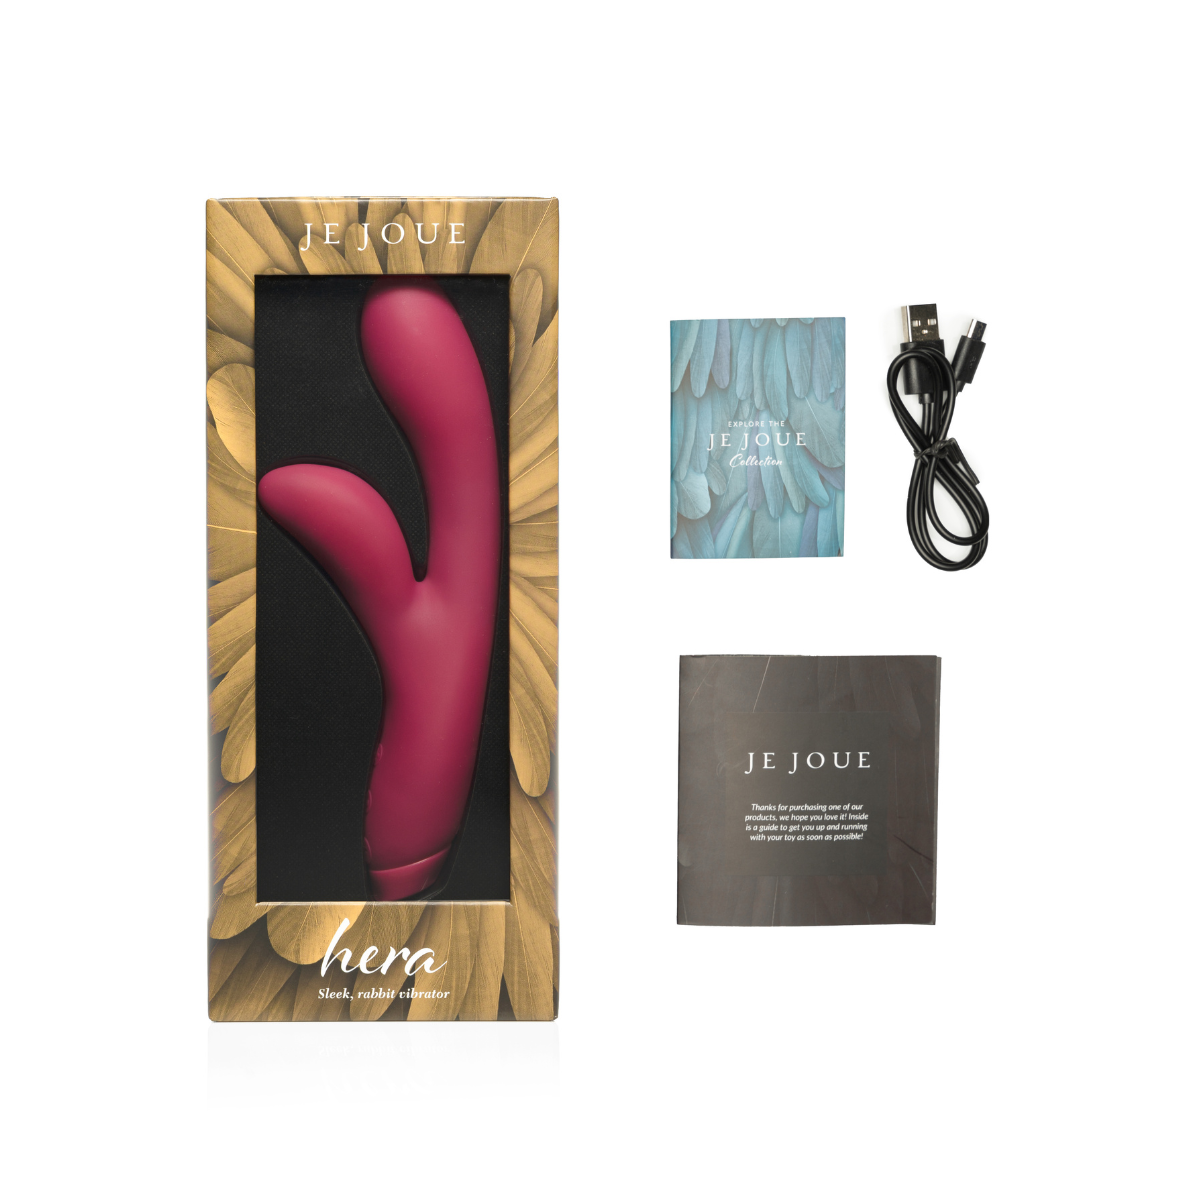 Hera Vibrator in box with accessories on side 